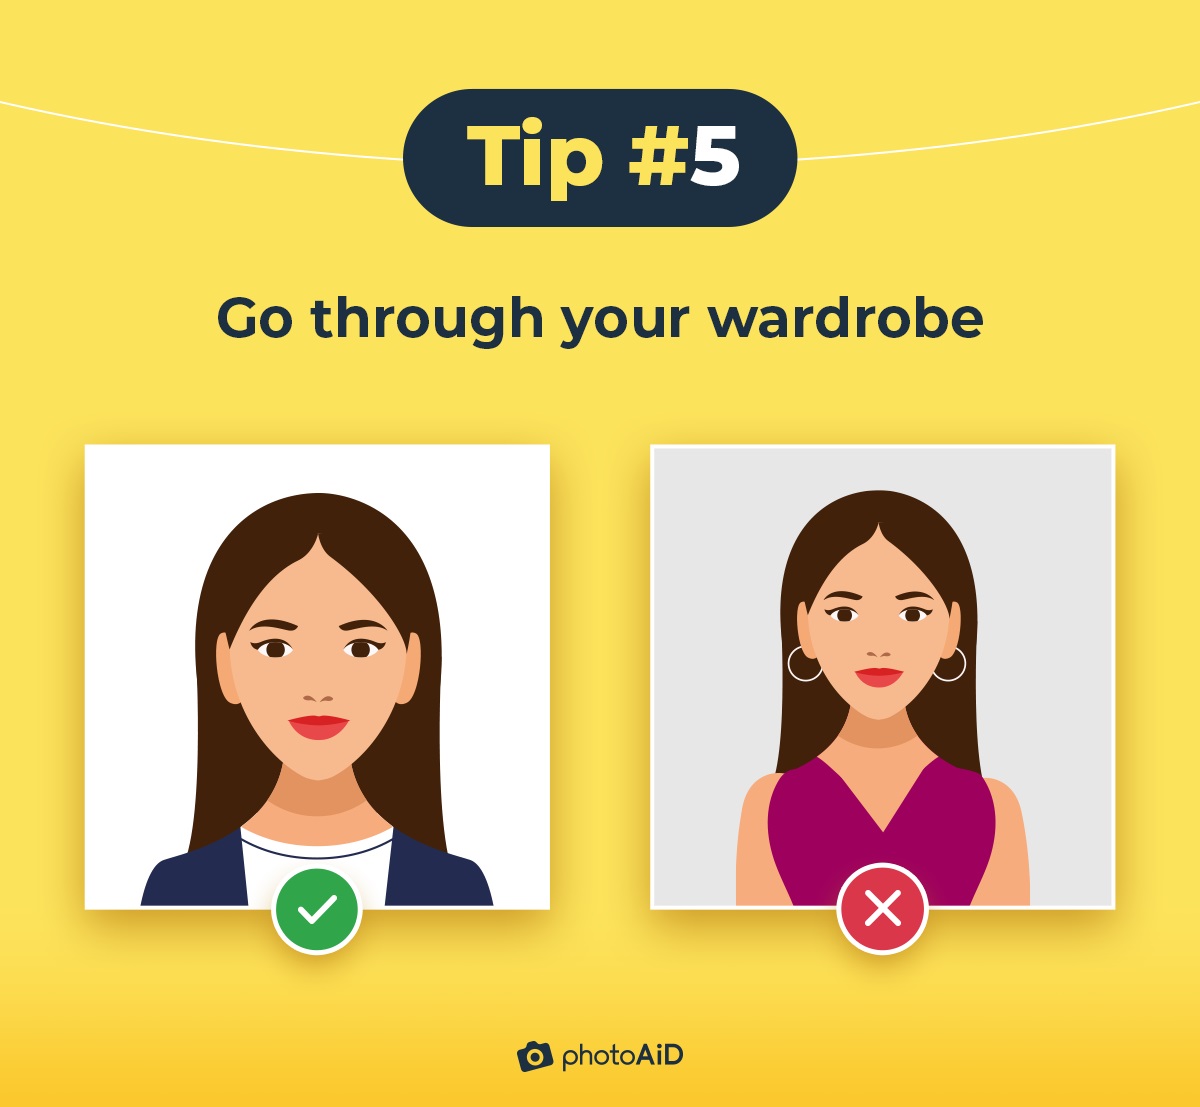 A LinkedIn profile picture tip about choosing the right outfit.